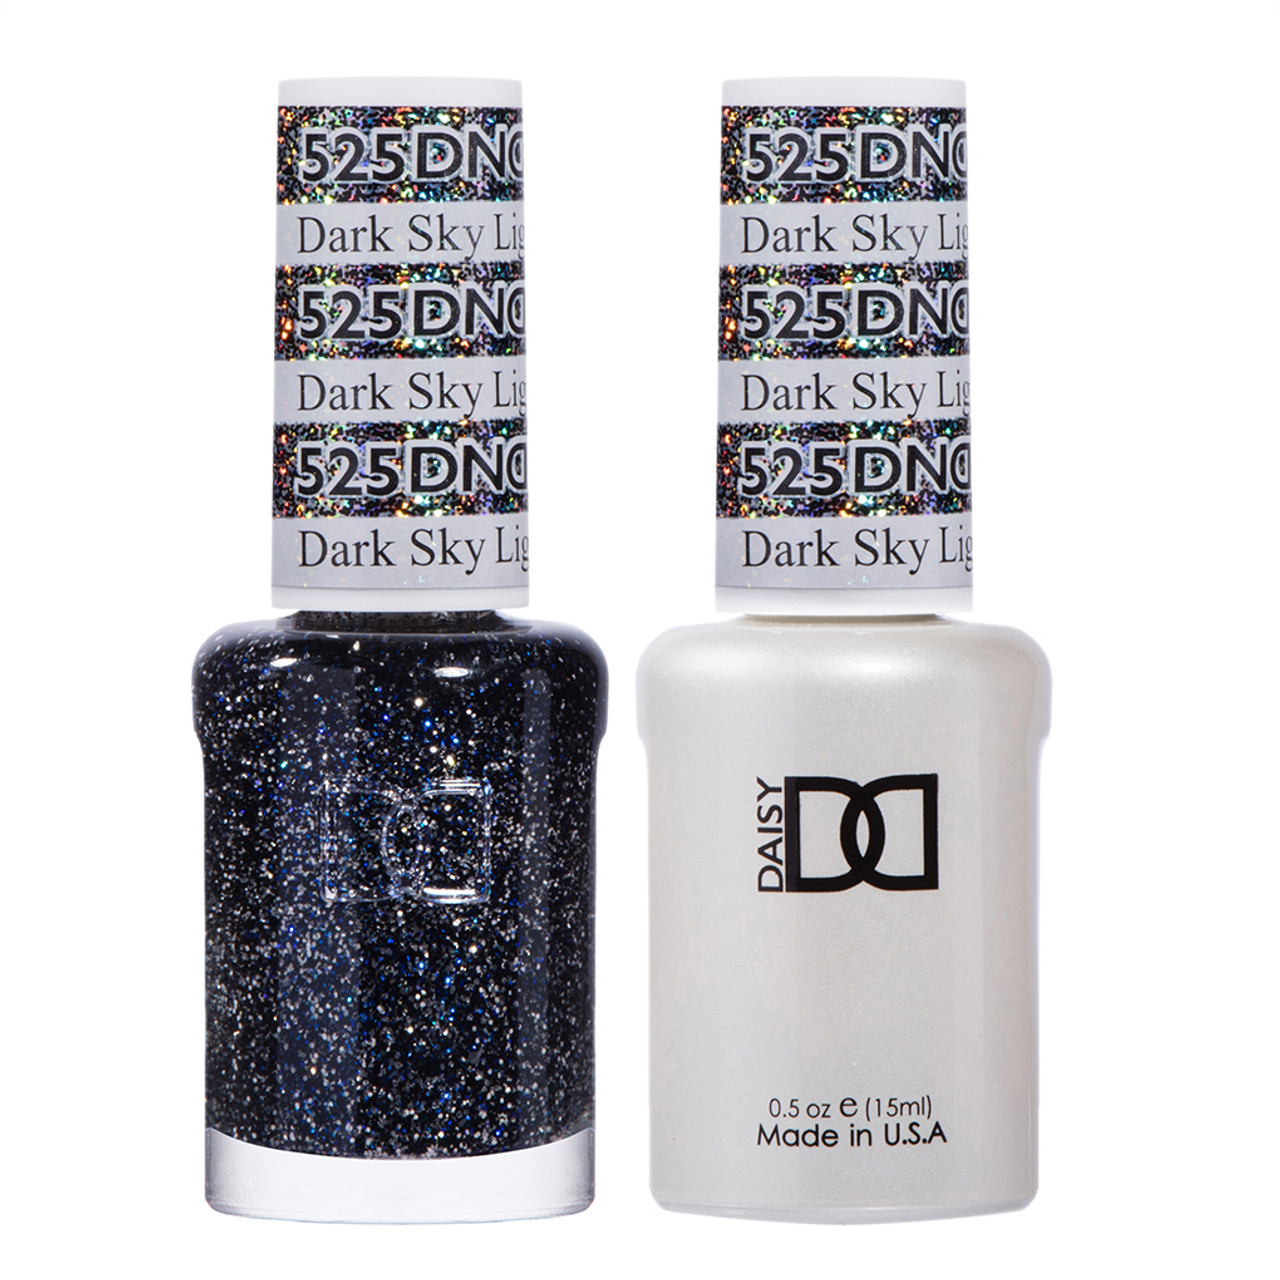 Buy FYORR Nail Polish Midnight Black With Shimmer Shine- Set of 2pc 15ML  Each Online at Low Prices in India - Amazon.in